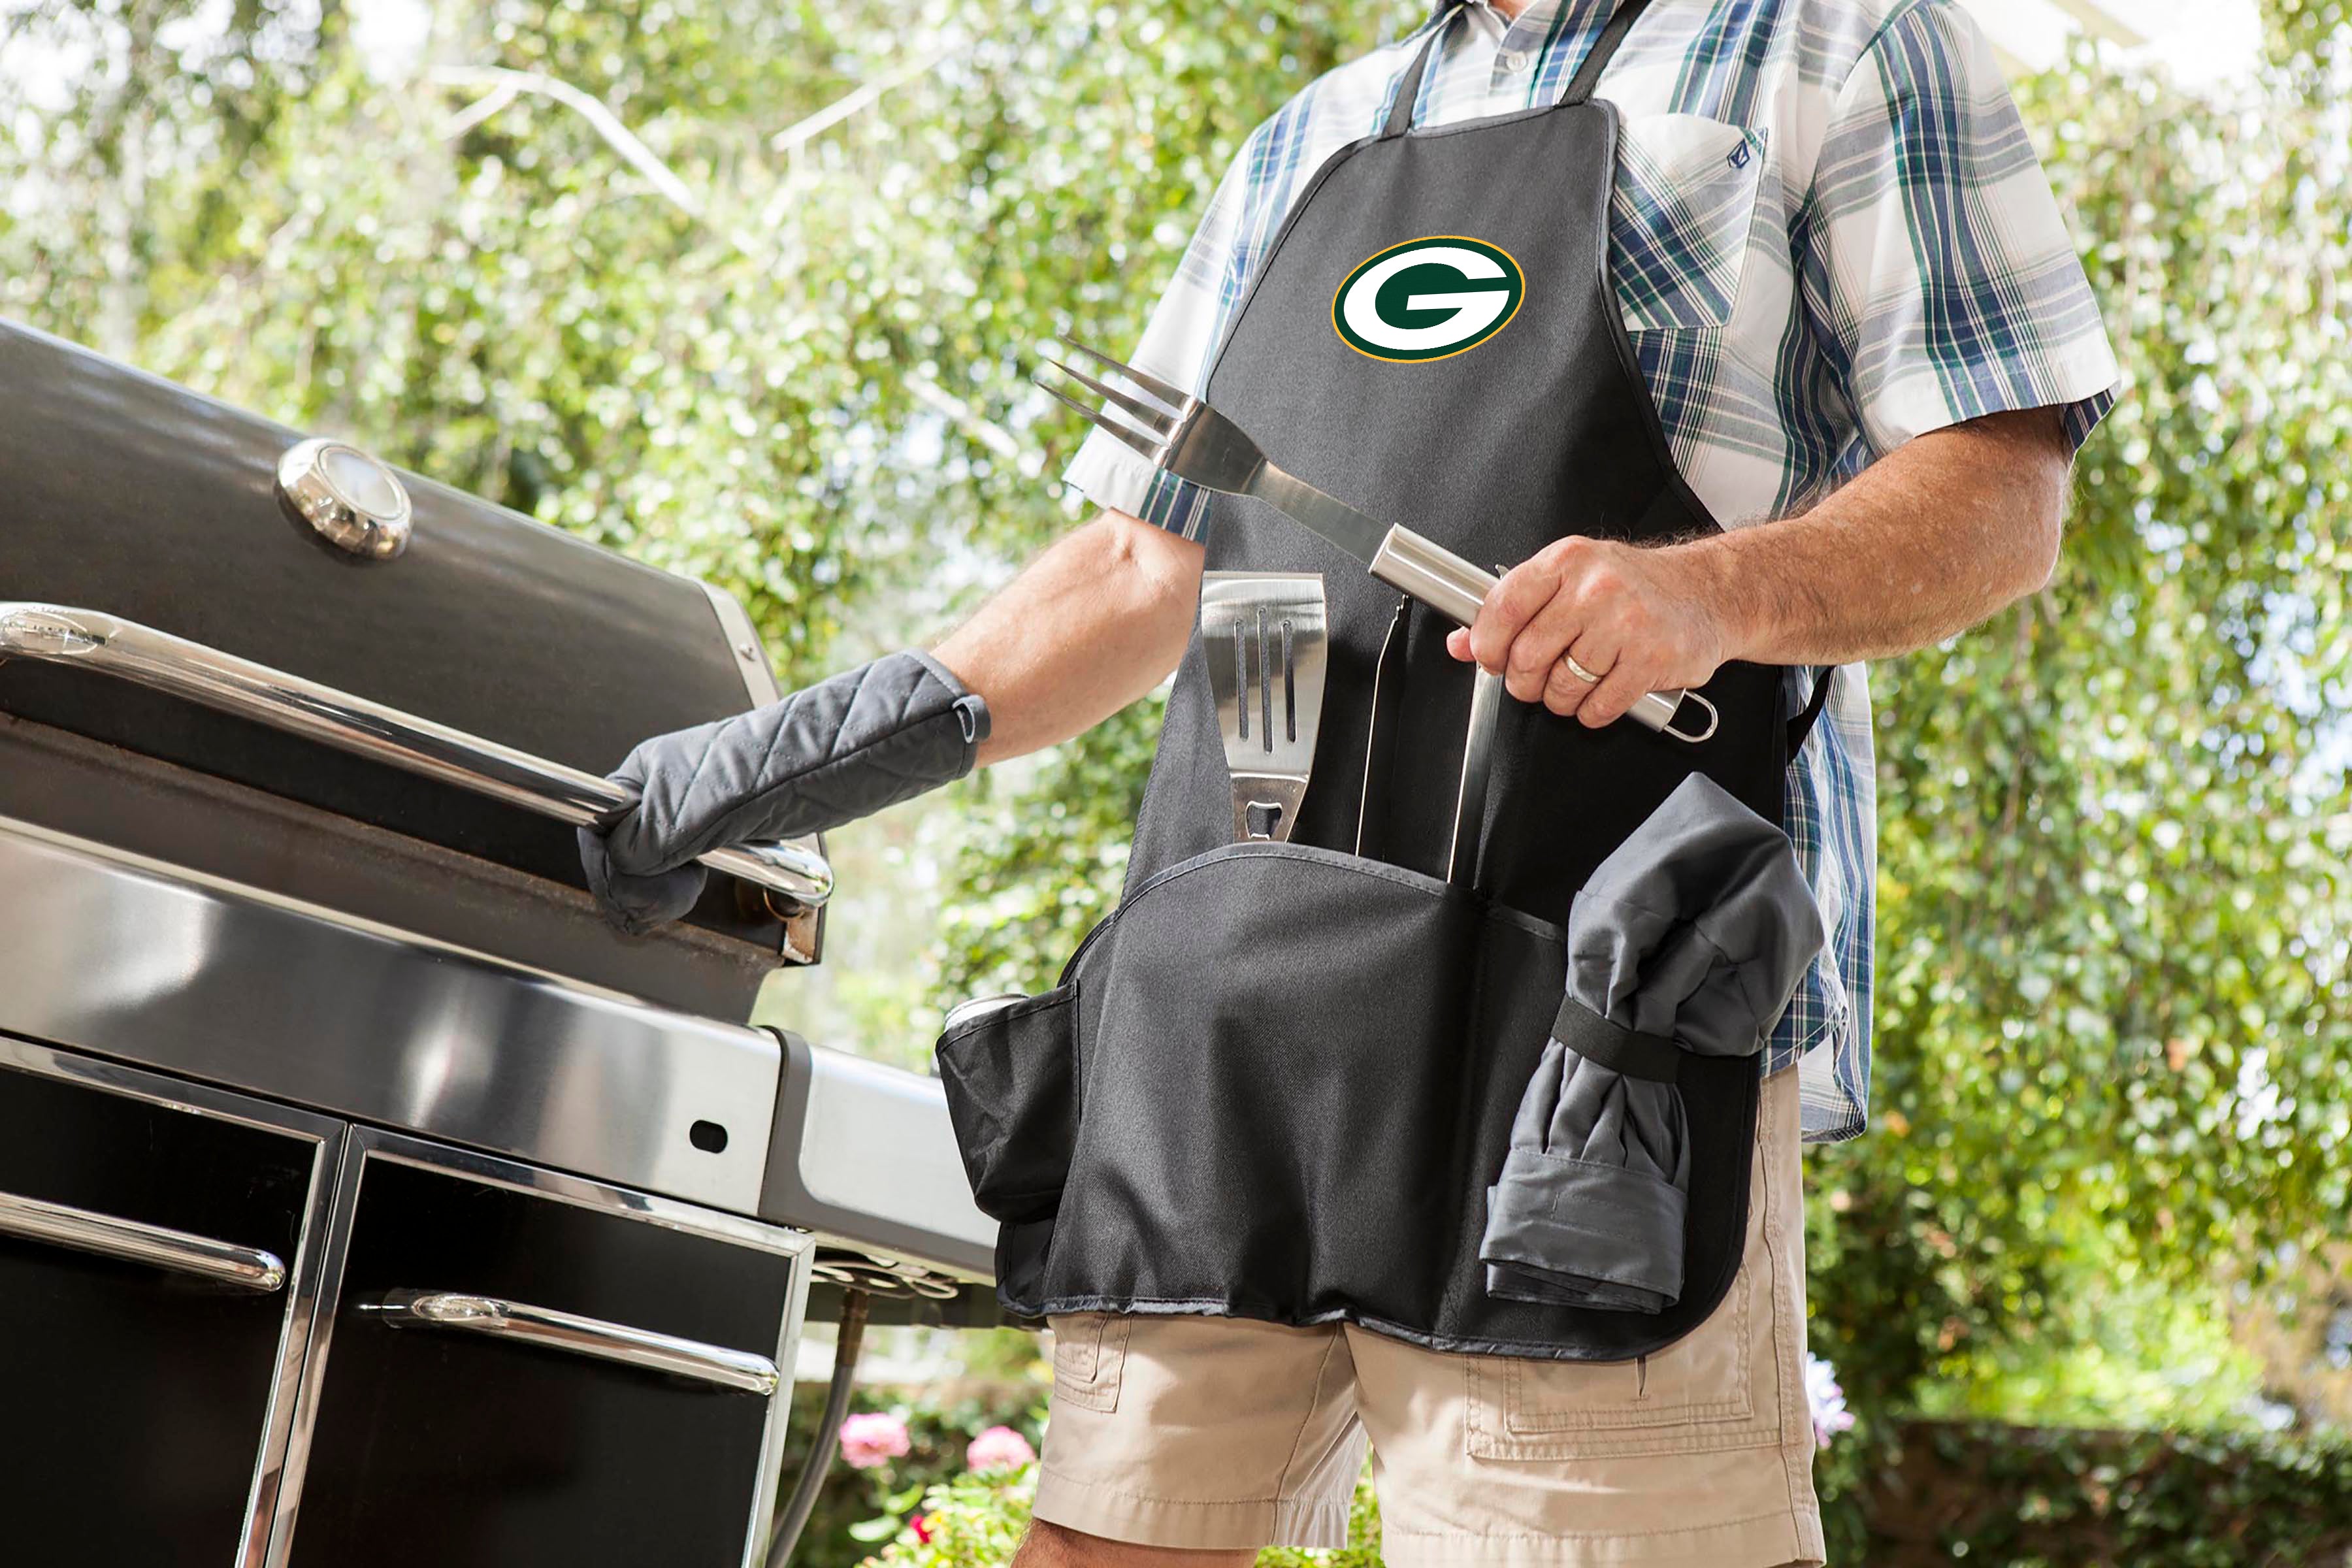 Green Bay Packers - BBQ Apron Tote Pro Grill Set